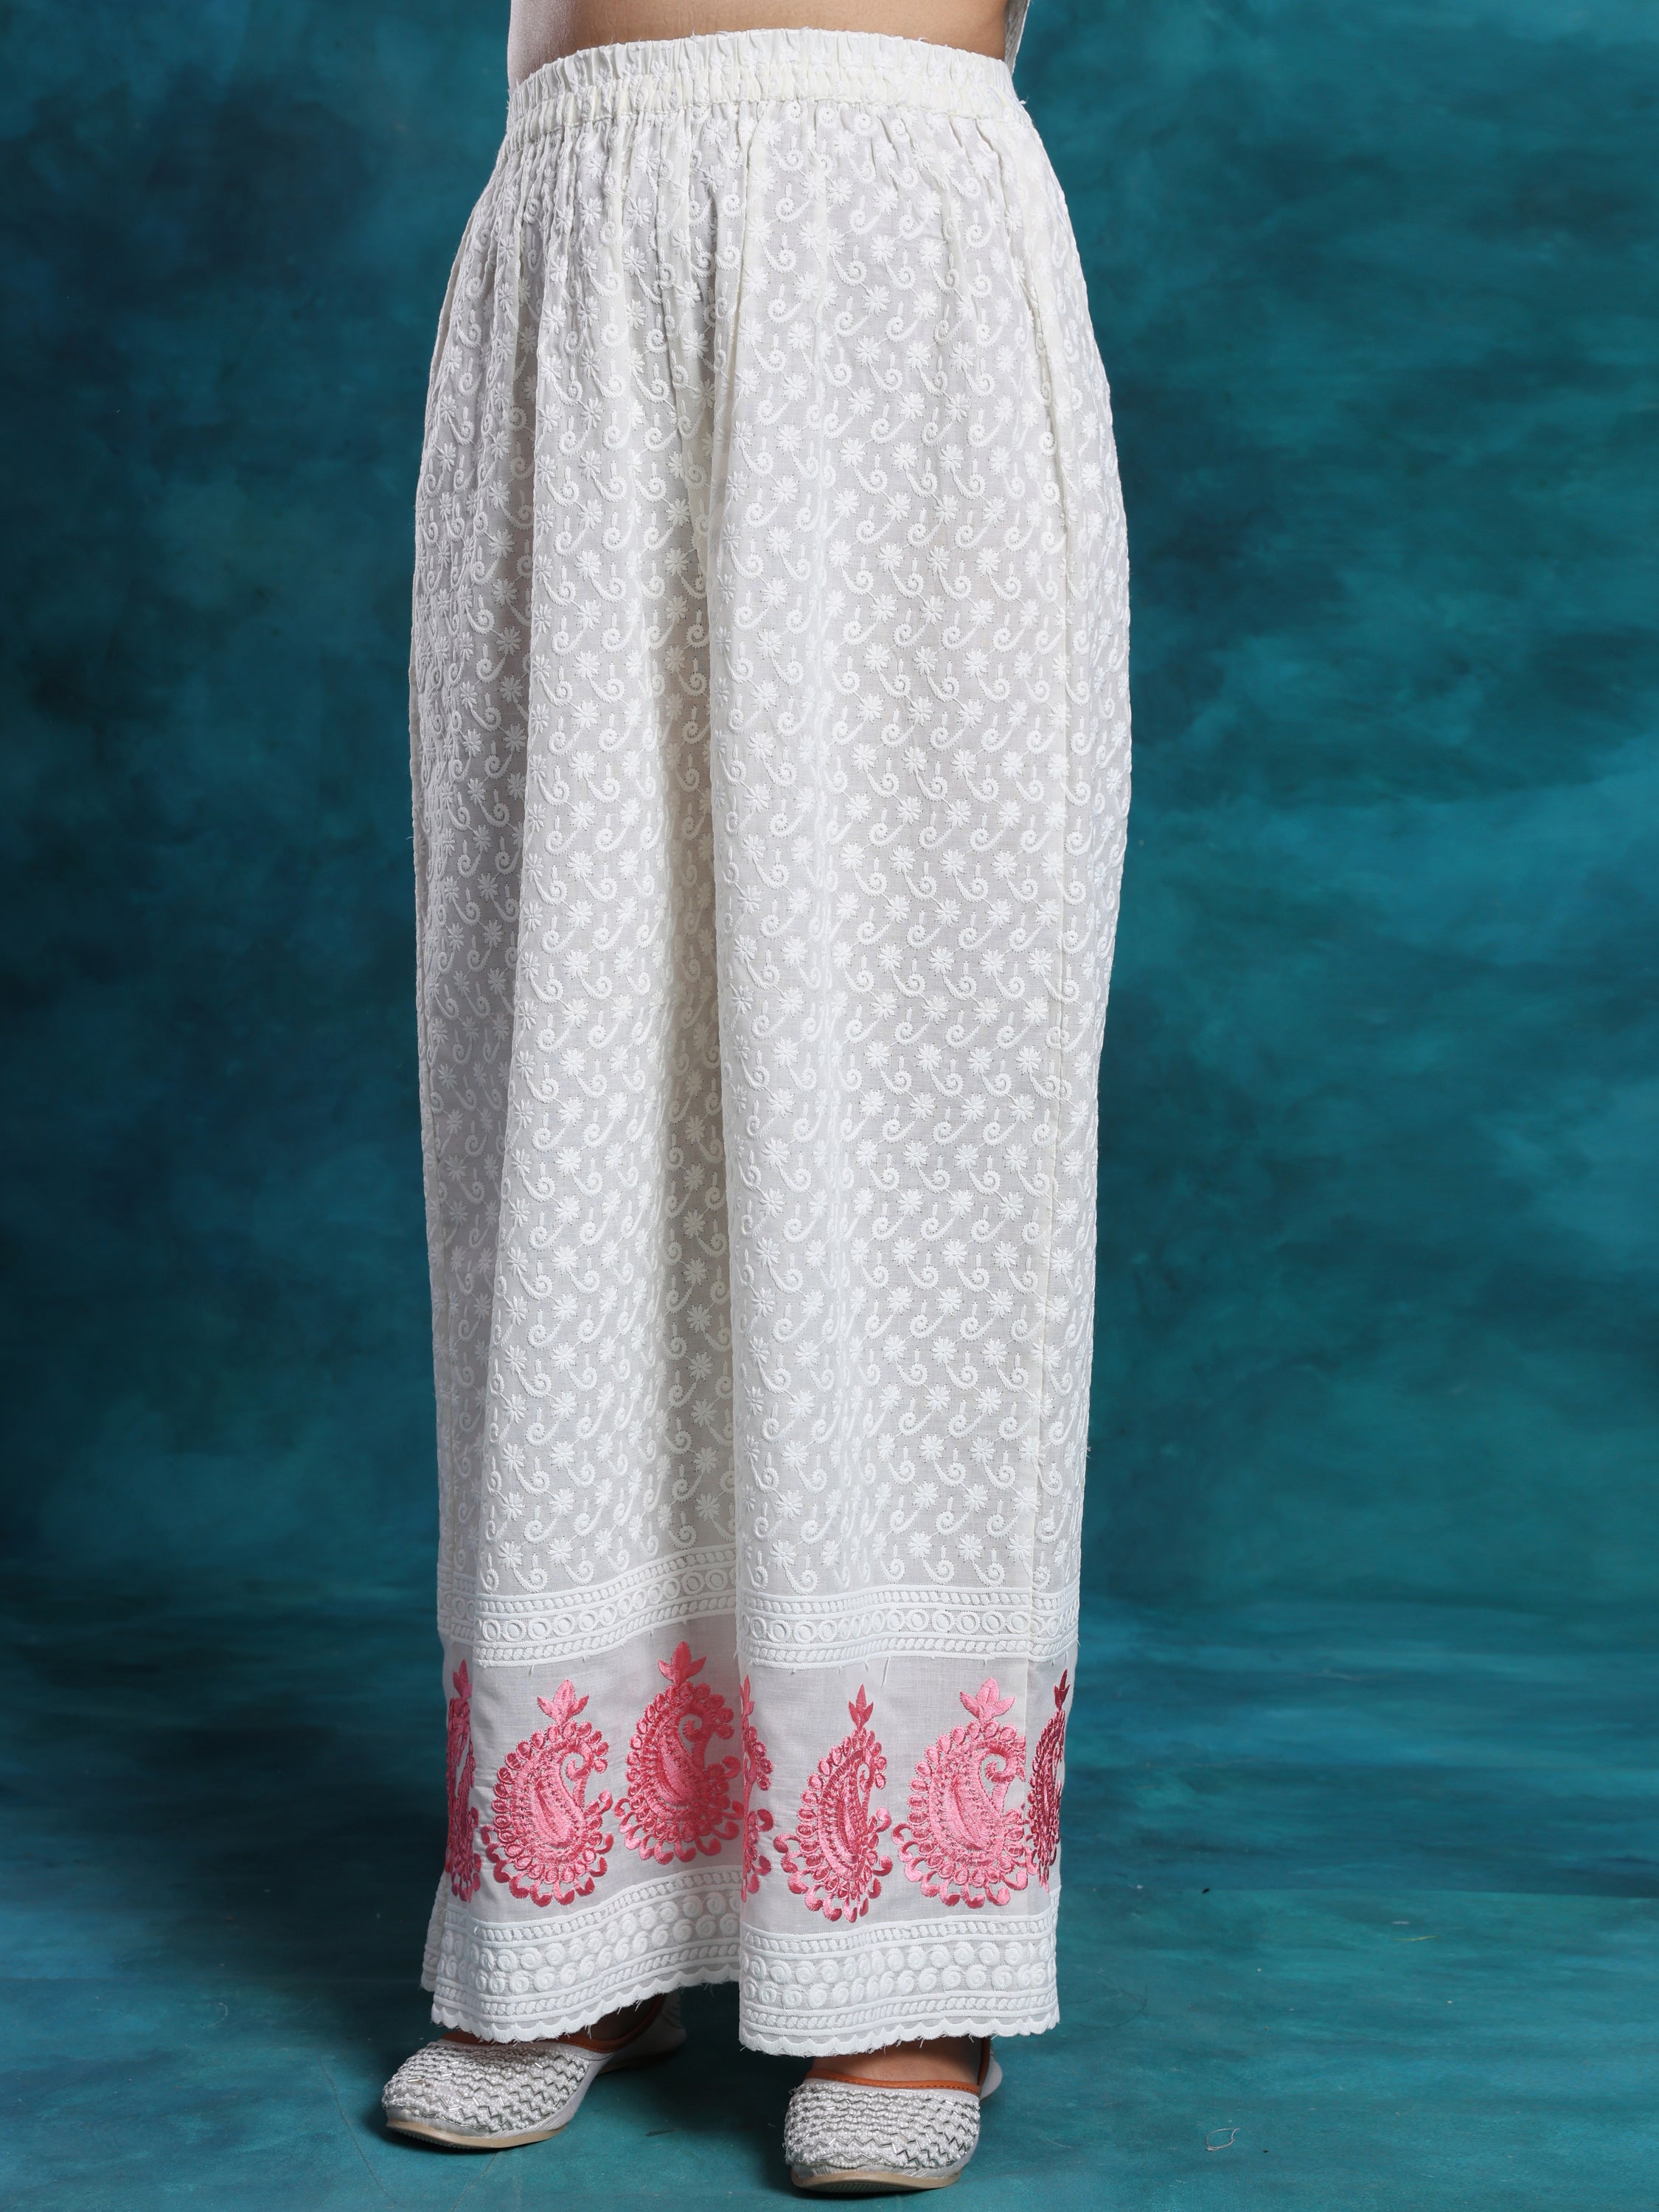 Schiffly Chikan Pink & White Embroidered Suit Set